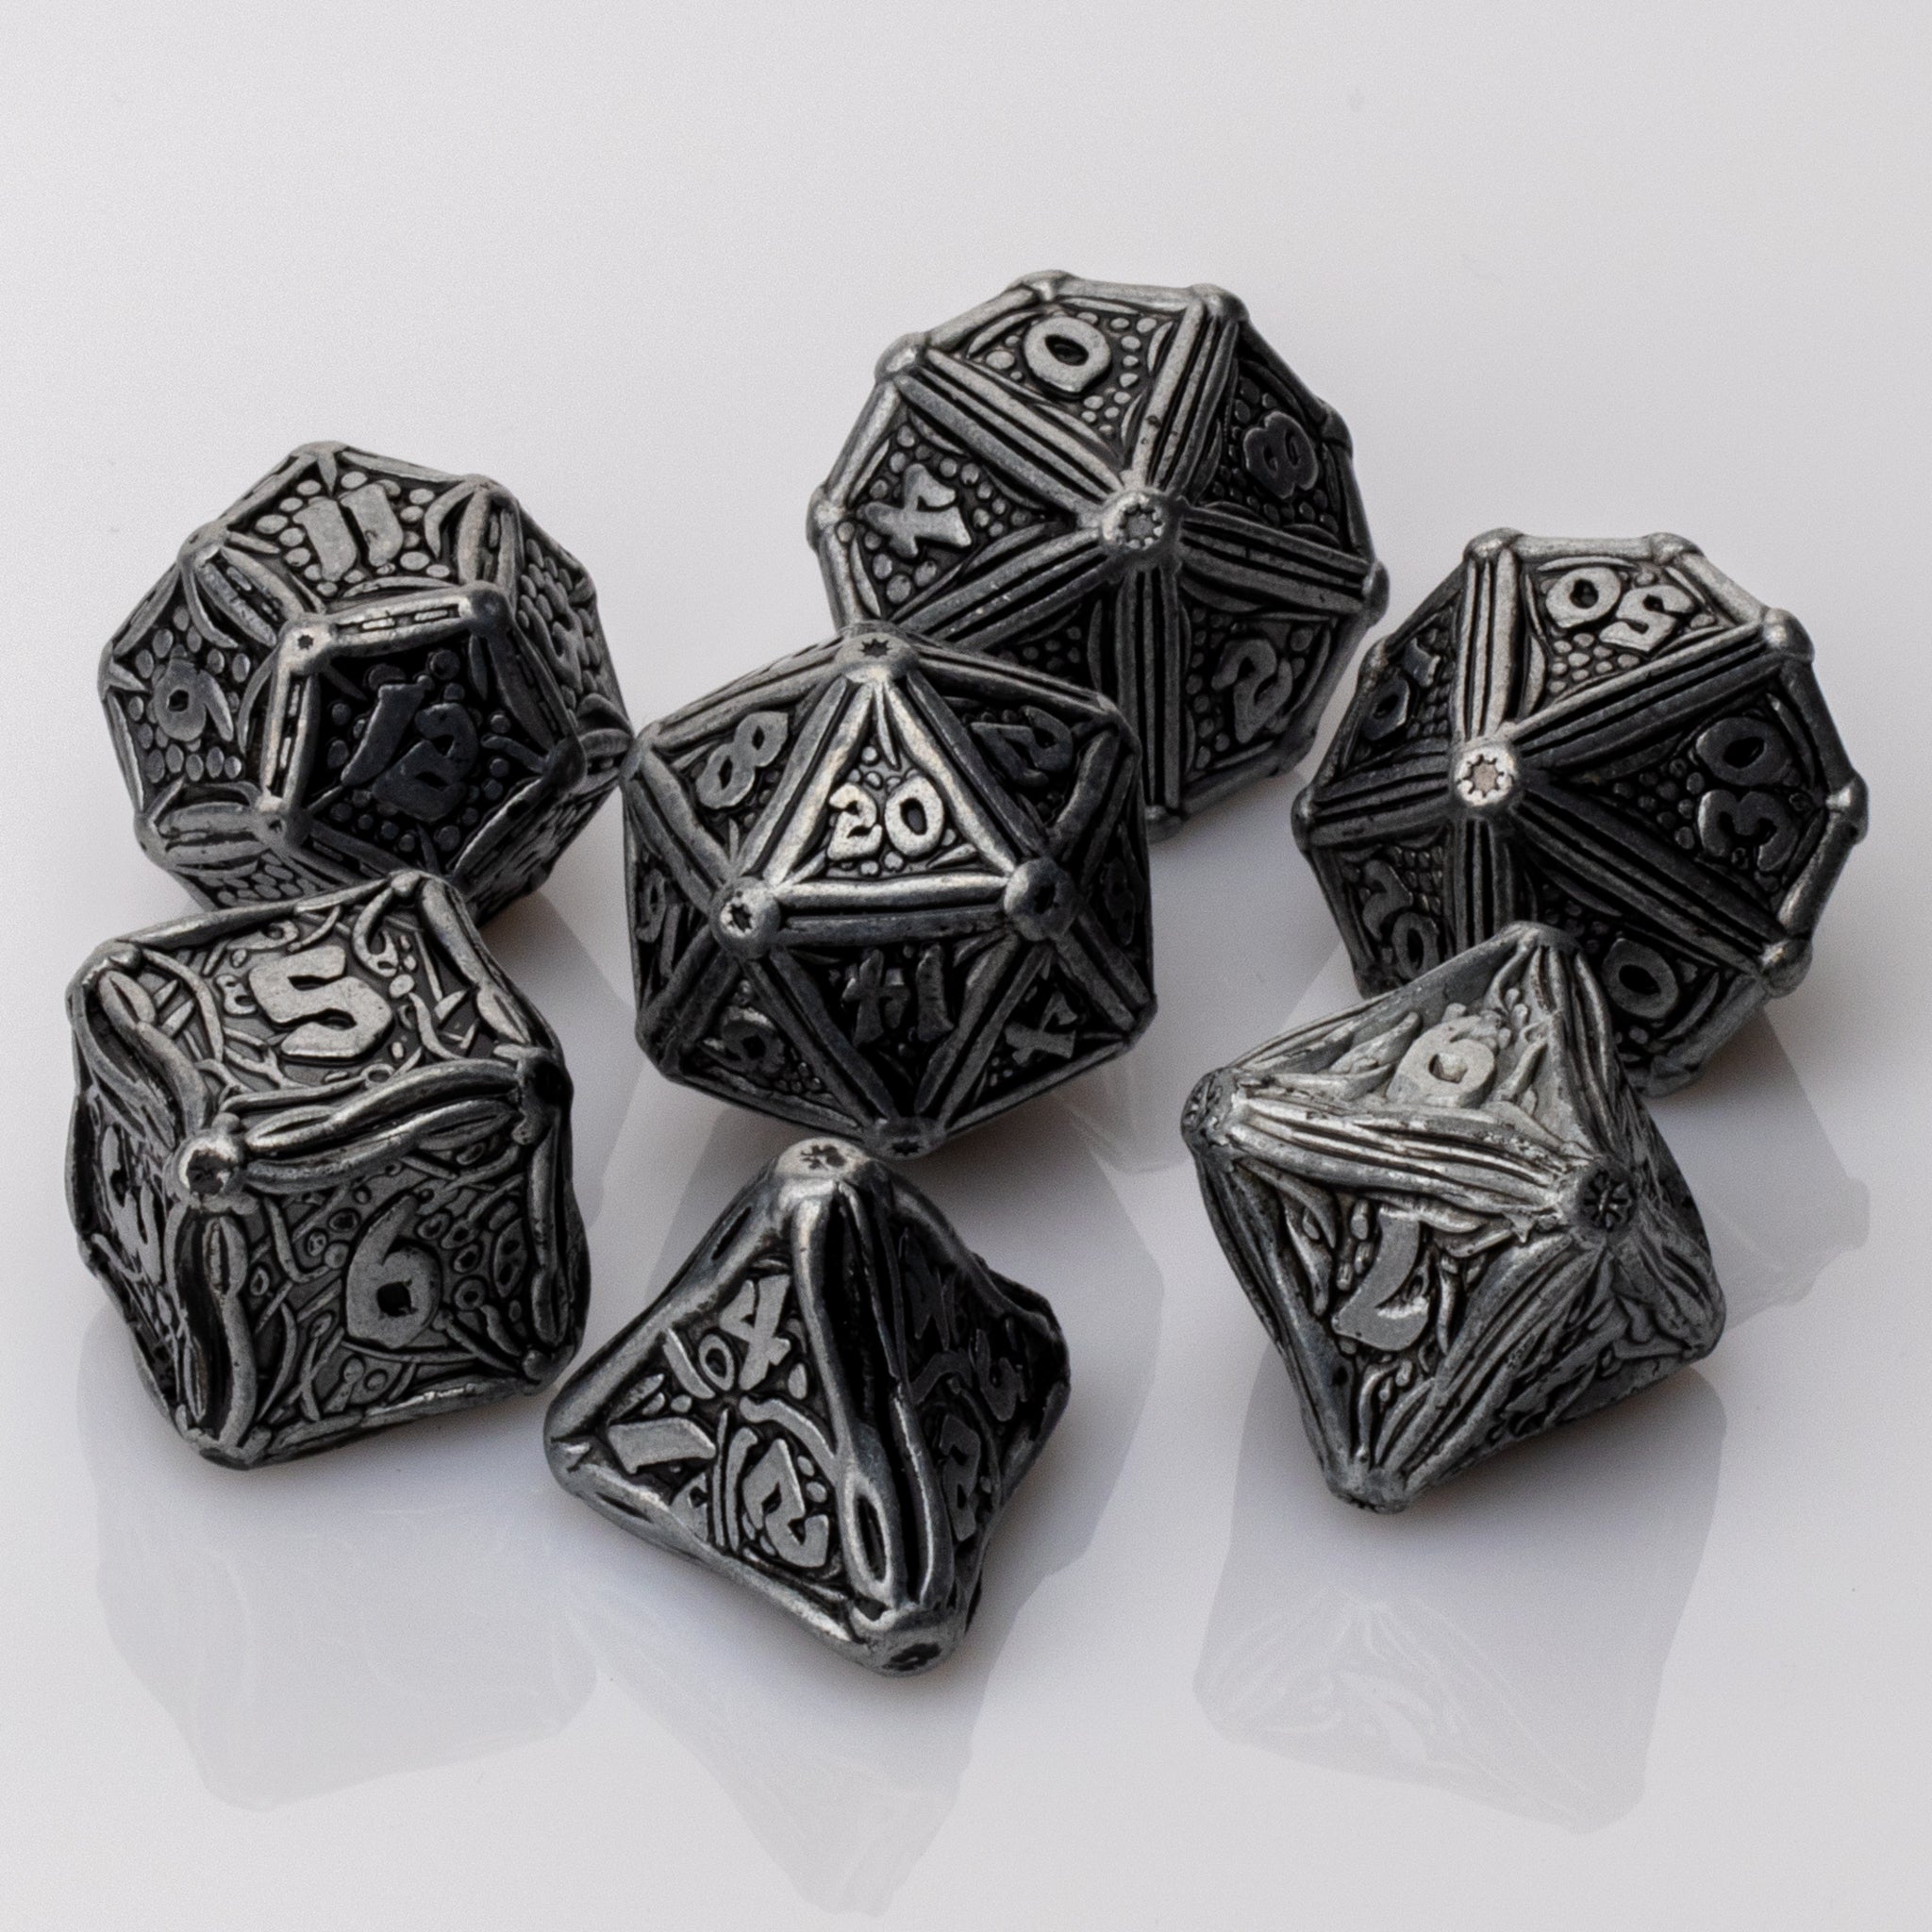 Ancient Iron, scrolled metal 7 piece RPG Dice Set on a white background.